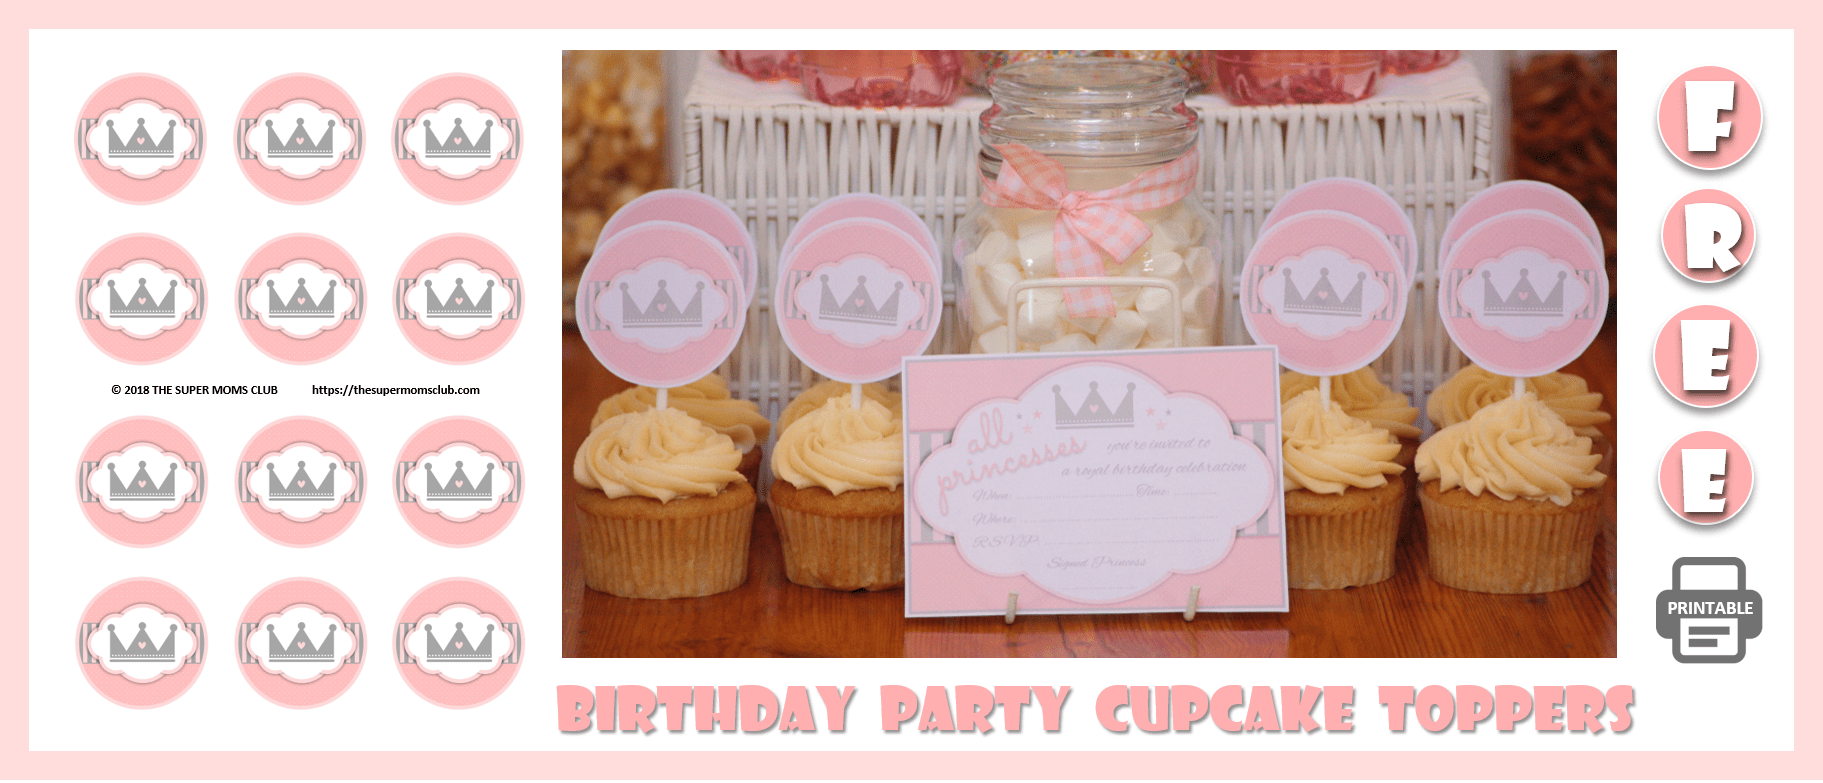 Princess Themed Birthday Party FREE PRINTABLE Cupcake Toppers - The Super Moms Club